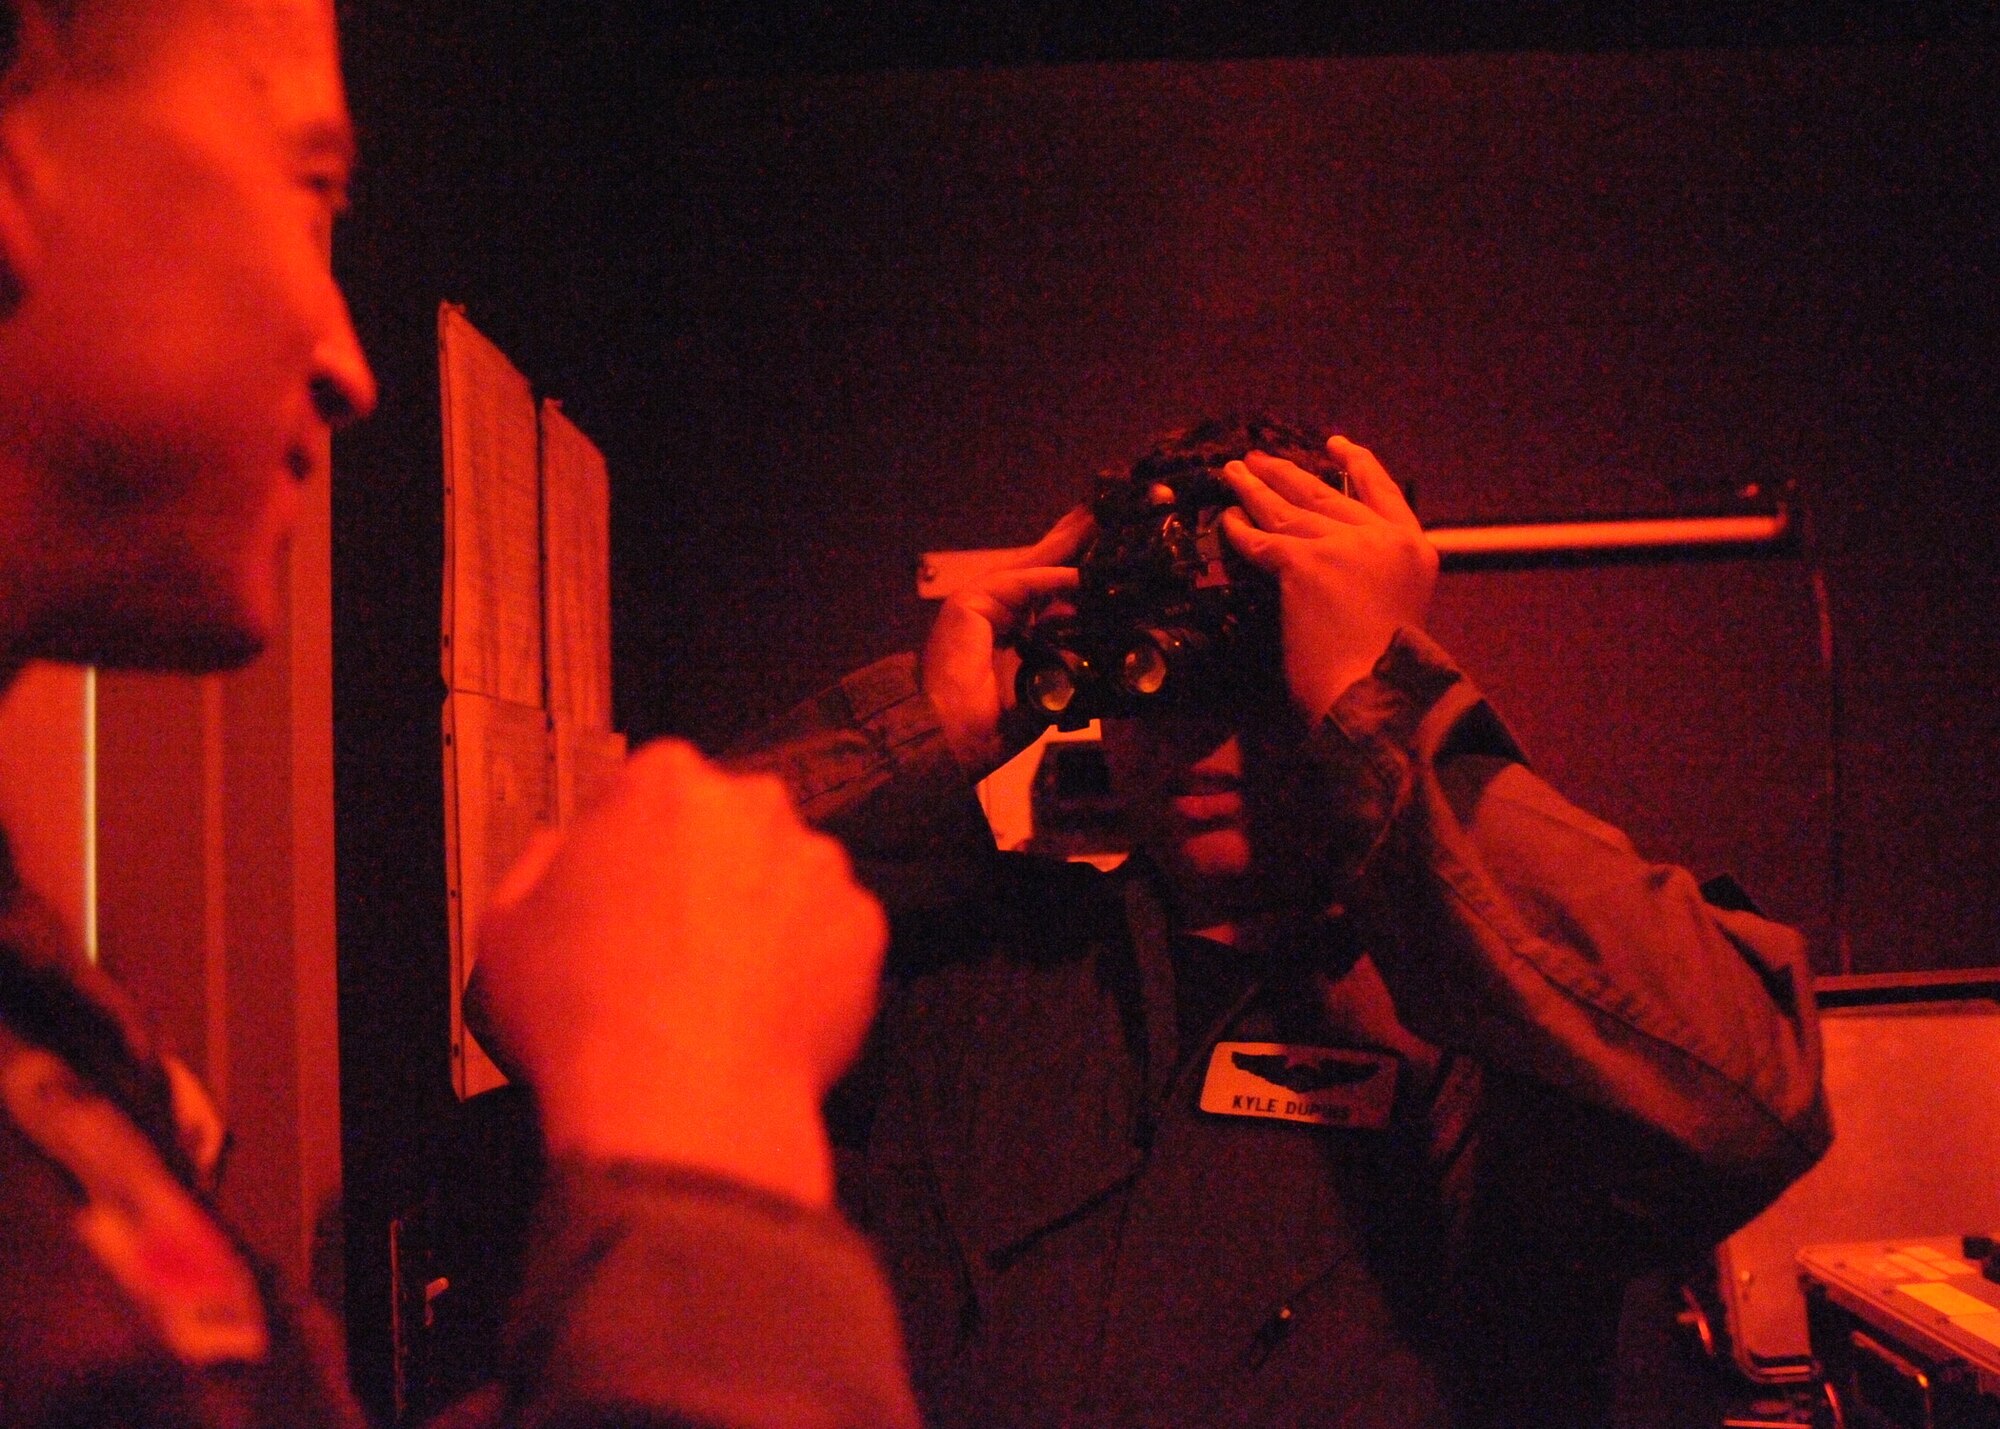 Kyle Dupuis uses infrared goggles to look at U.S. Air Force Lt. Col. Theodore Coiner, 357th Fighter Squadron assistant director of operations, in the 357th FS on Davis-Monthan Air Force Base, Ariz. Oct. 21, 2011. Coiner explained to Kyle that pilots sometimes use the goggles for night missions. (U.S. Air Force photo by Airman 1st Class Timothy D. Moore/Released)